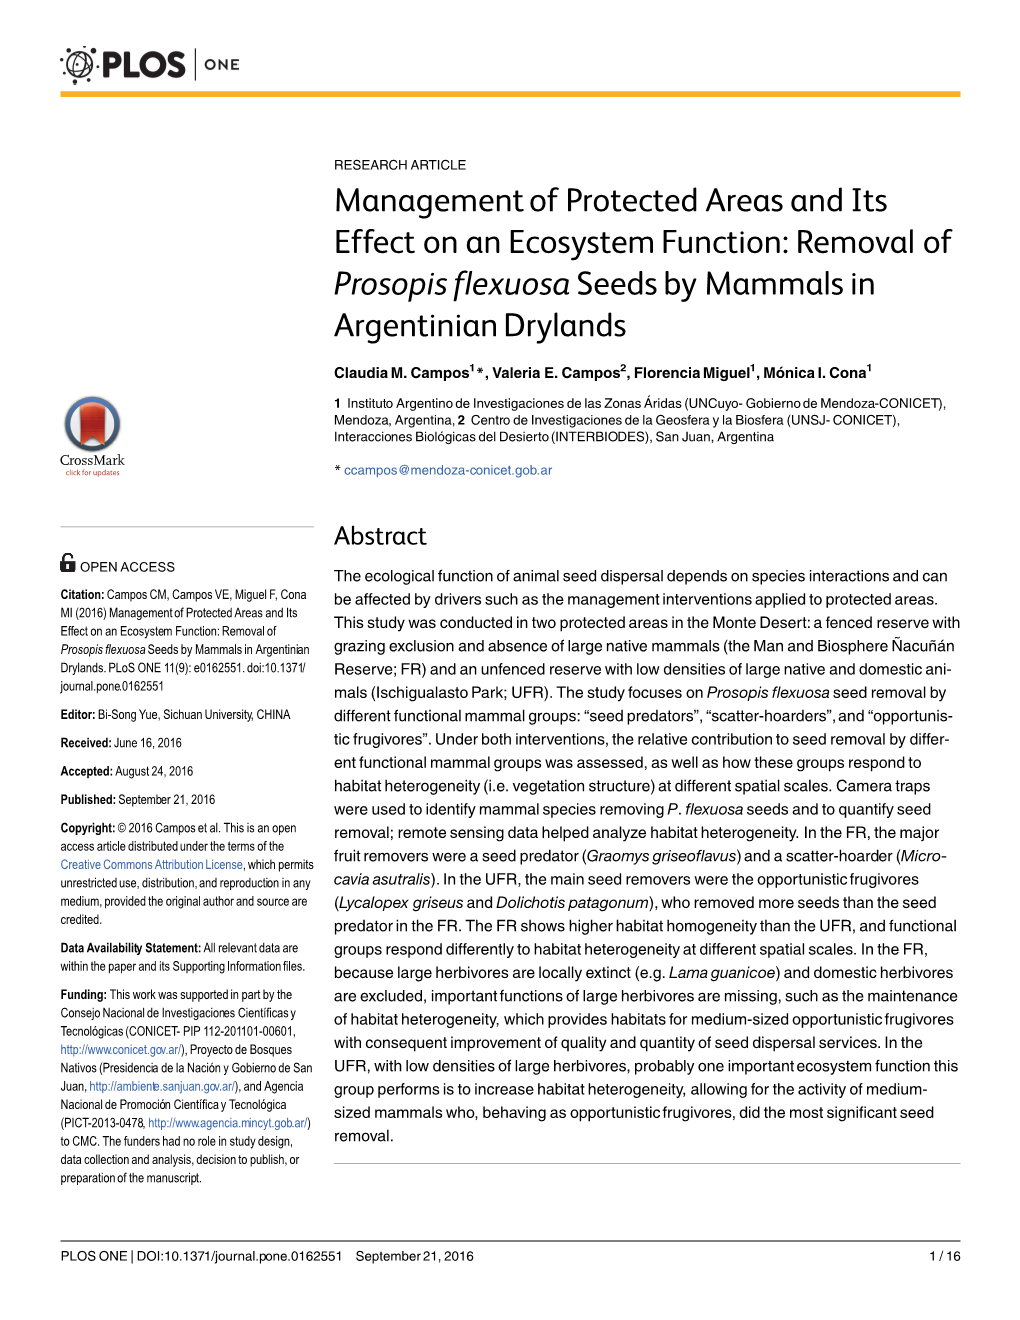 Management of Protected Areas and Its Effect on an Ecosystem Function: Removal of Prosopis Flexuosa Seeds by Mammals in Argentinian Drylands